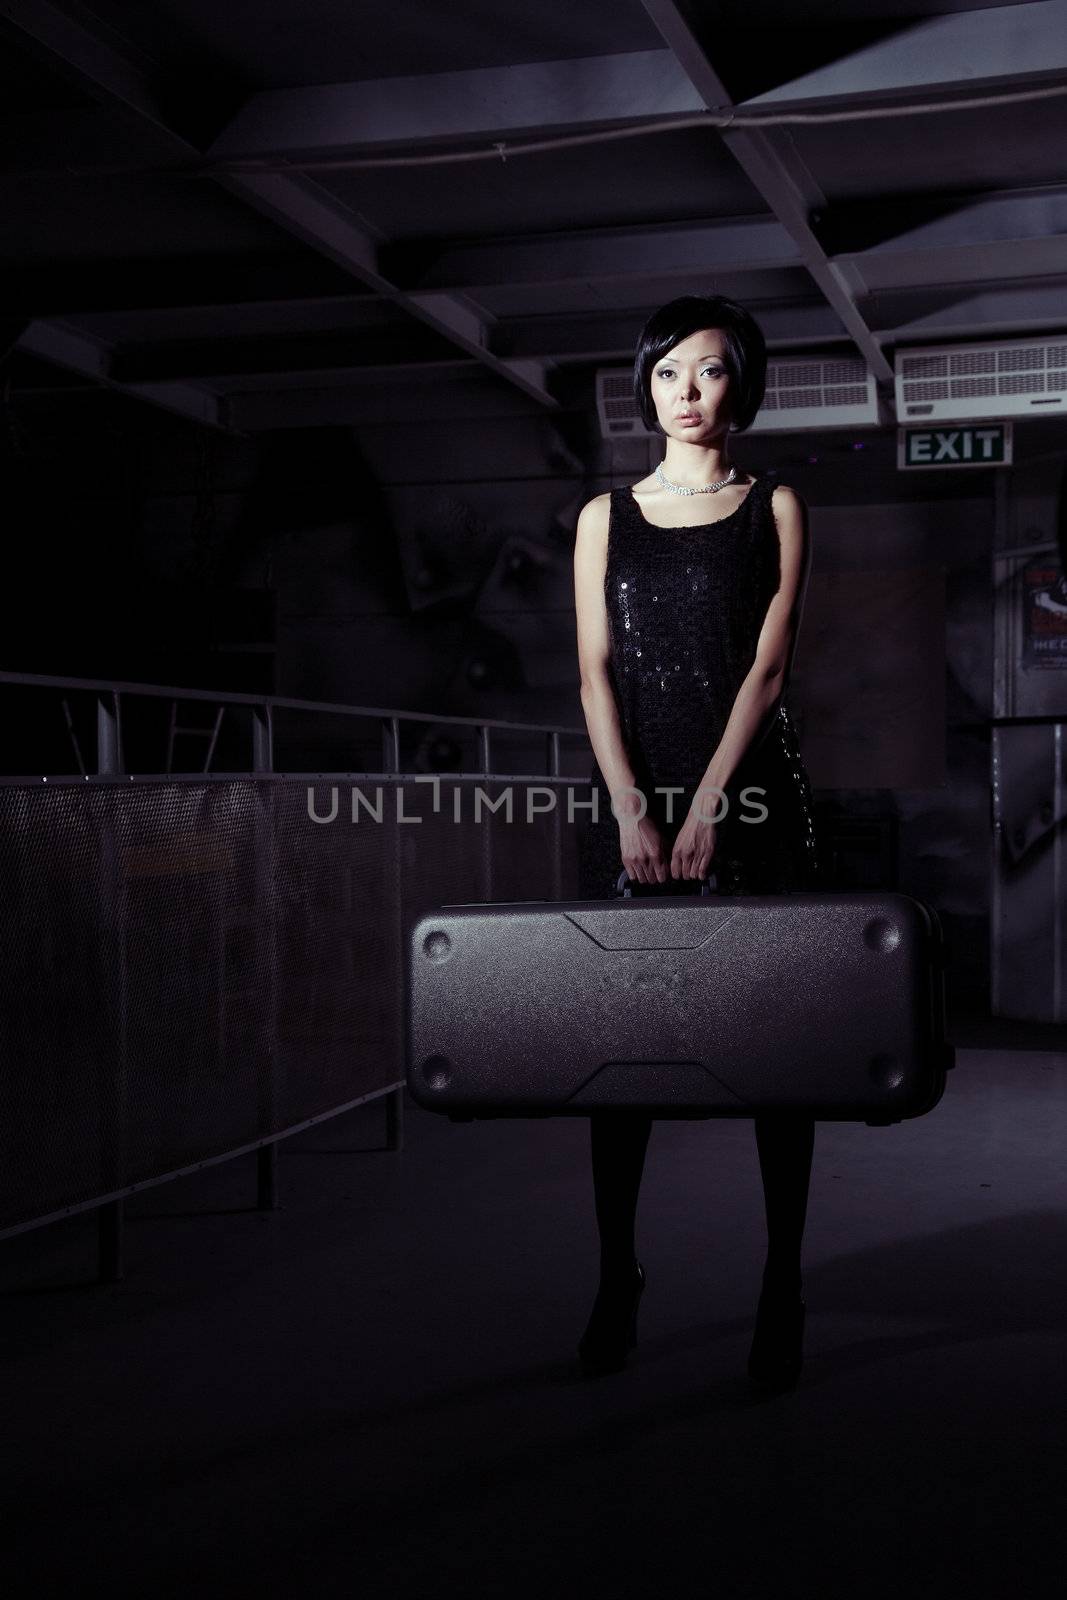 Small brunette lady holding big suitcase in the dark airport terminal